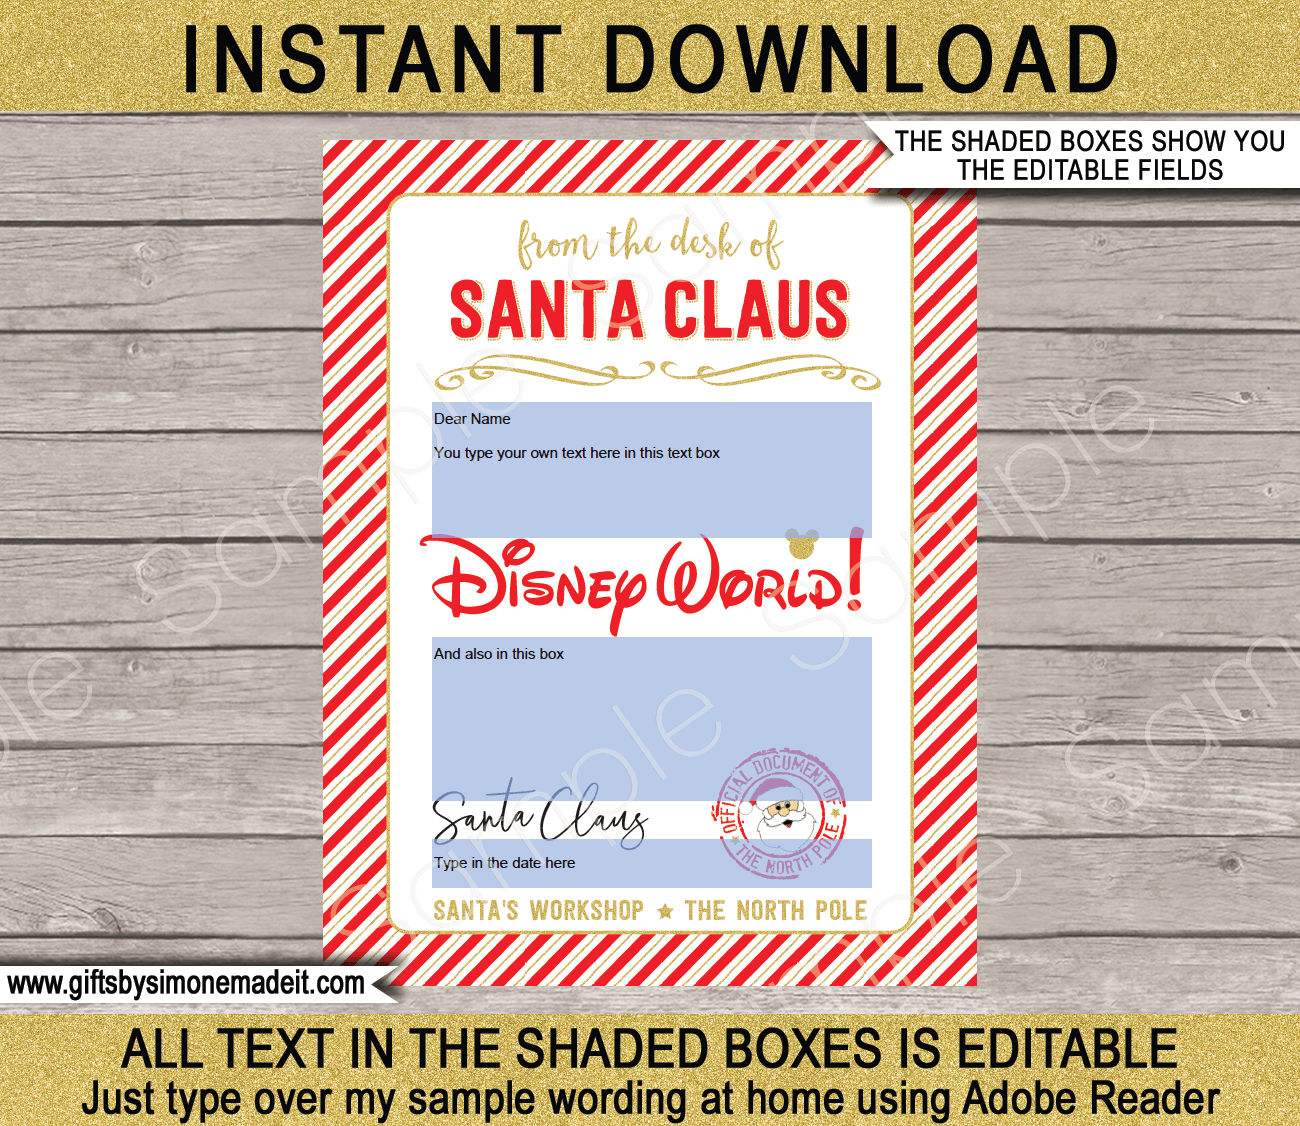 https://www.giftsbysimonemadeit.com/wp-content/uploads/2021/11/Christmas-Disney-World-Letter-from-Santa-RED-GOLD-editable-text.png